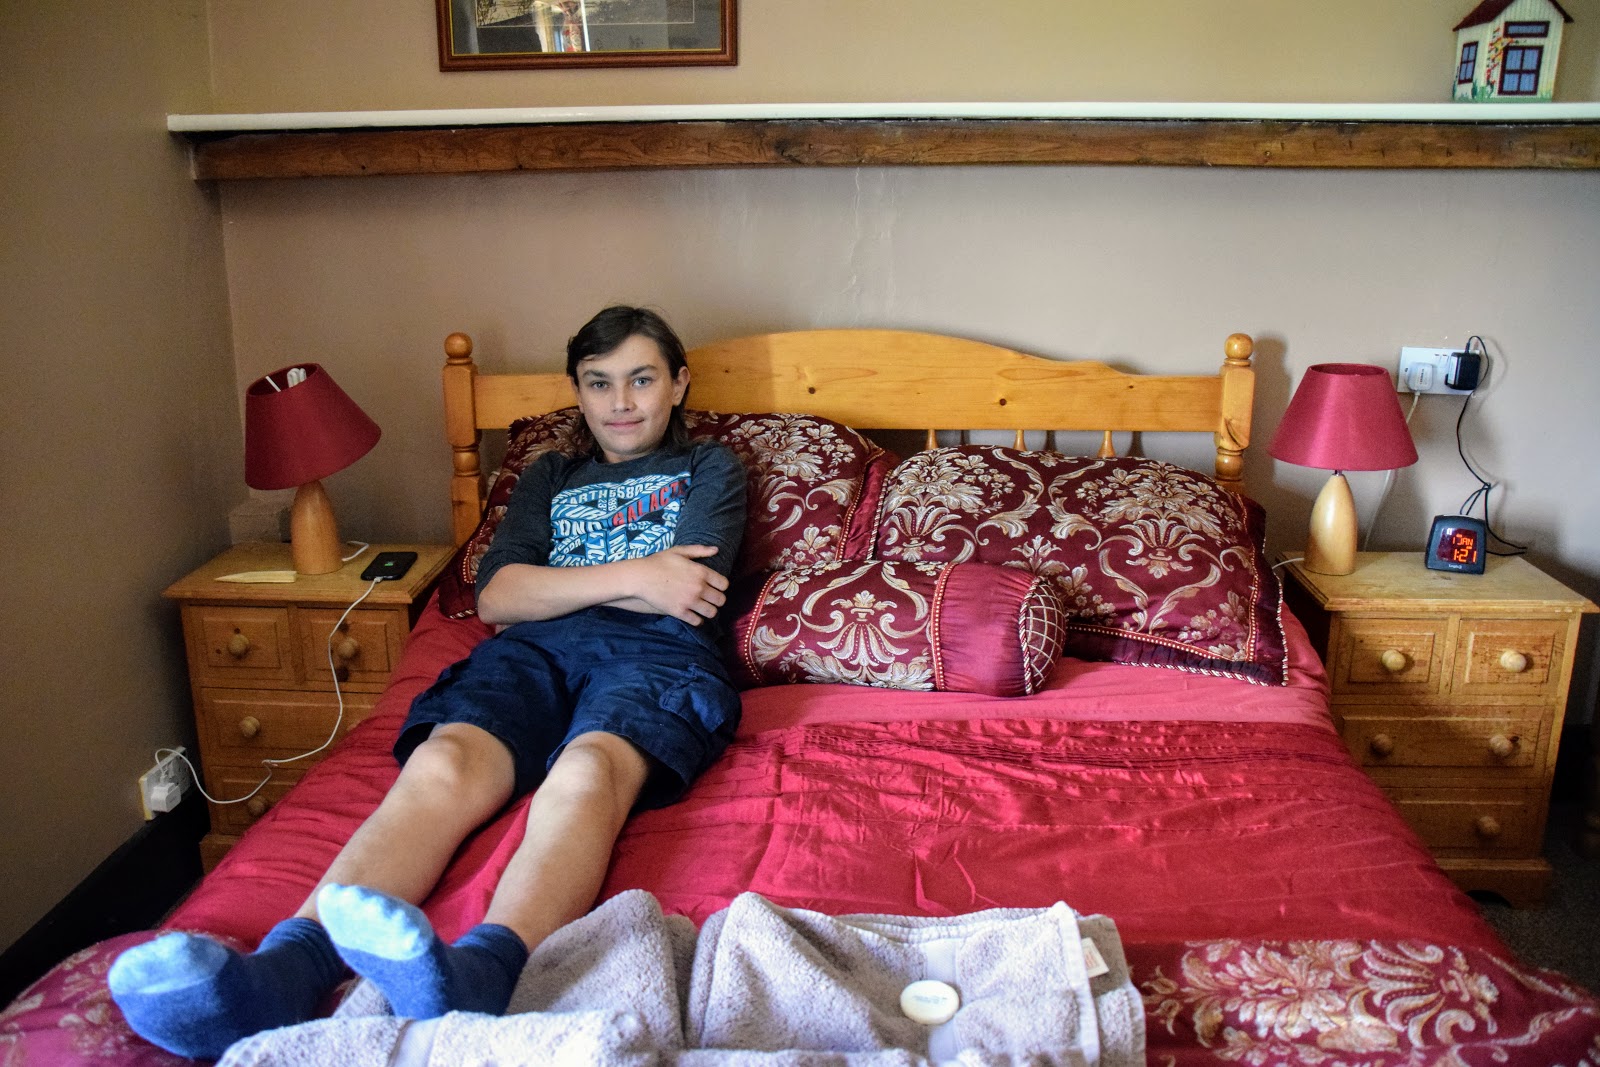 , A Surprise Stay at the Lower Lode Inn, Tewkesbury